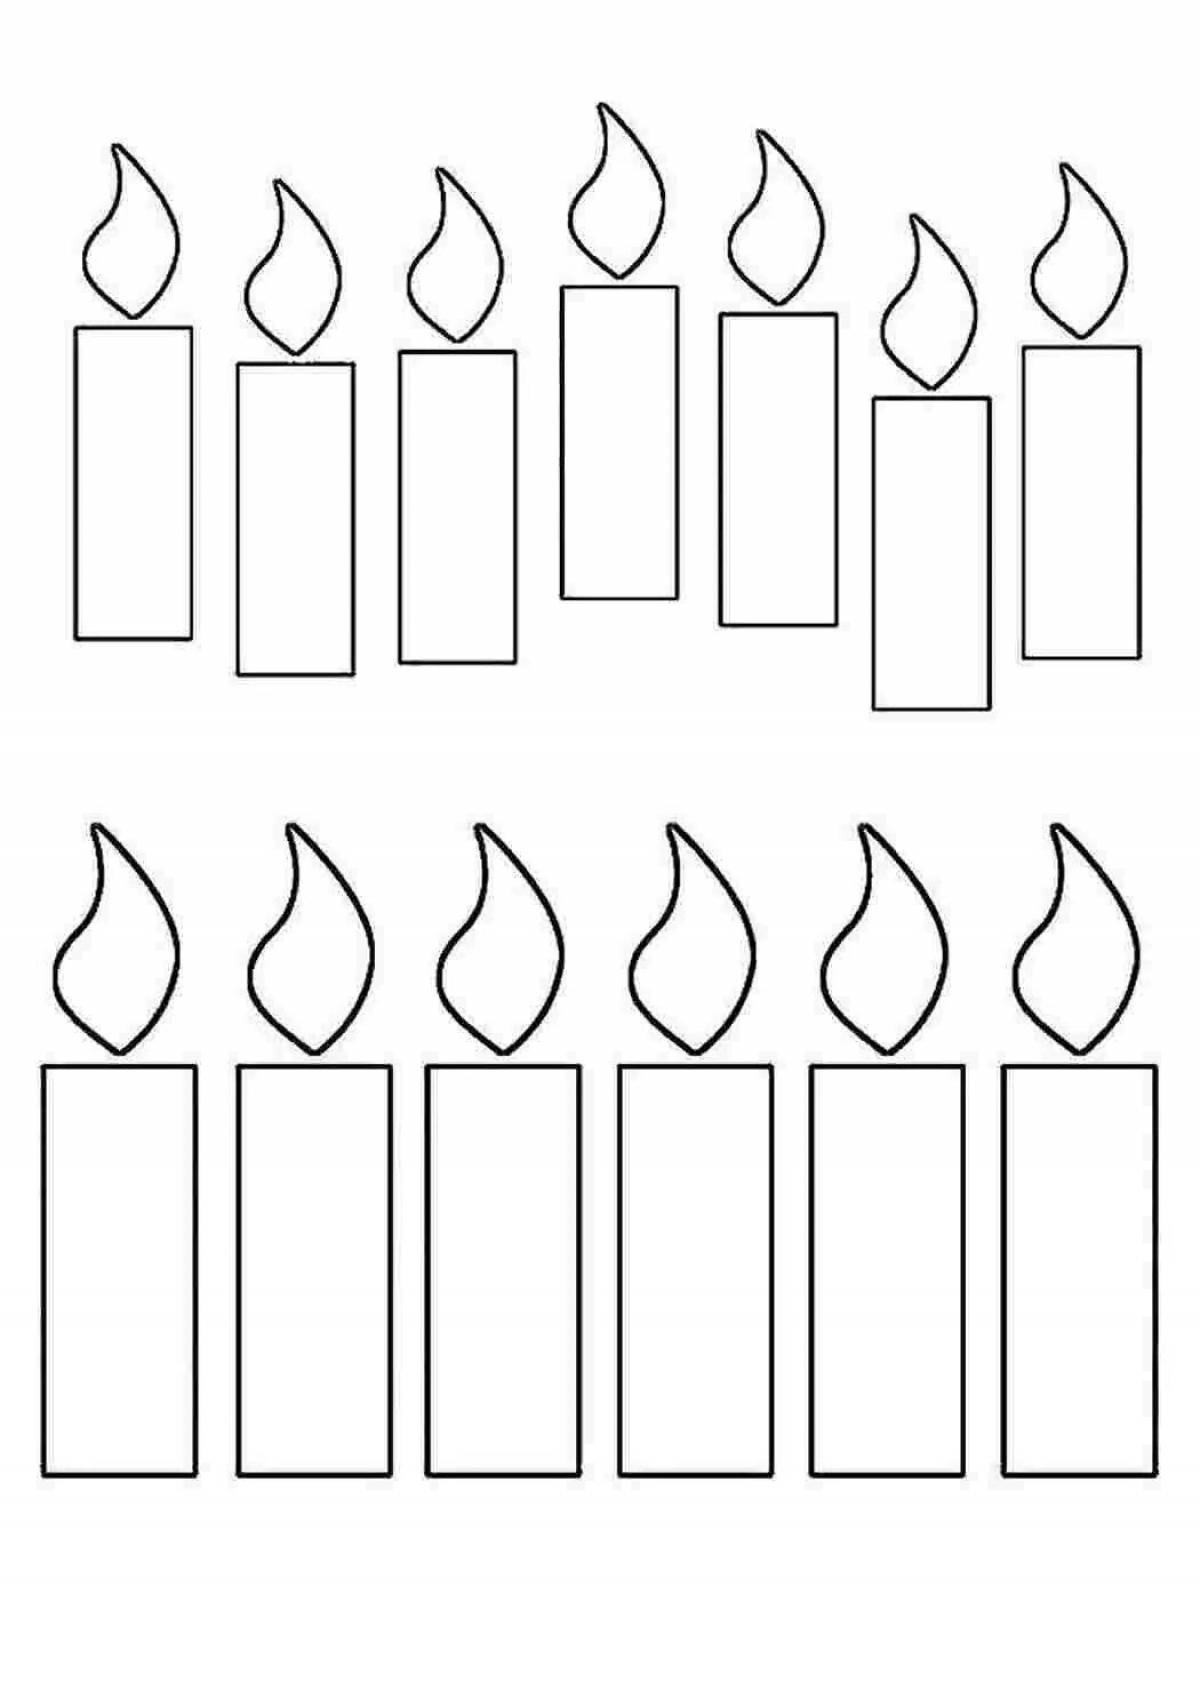 Exciting memory candle coloring book for kids